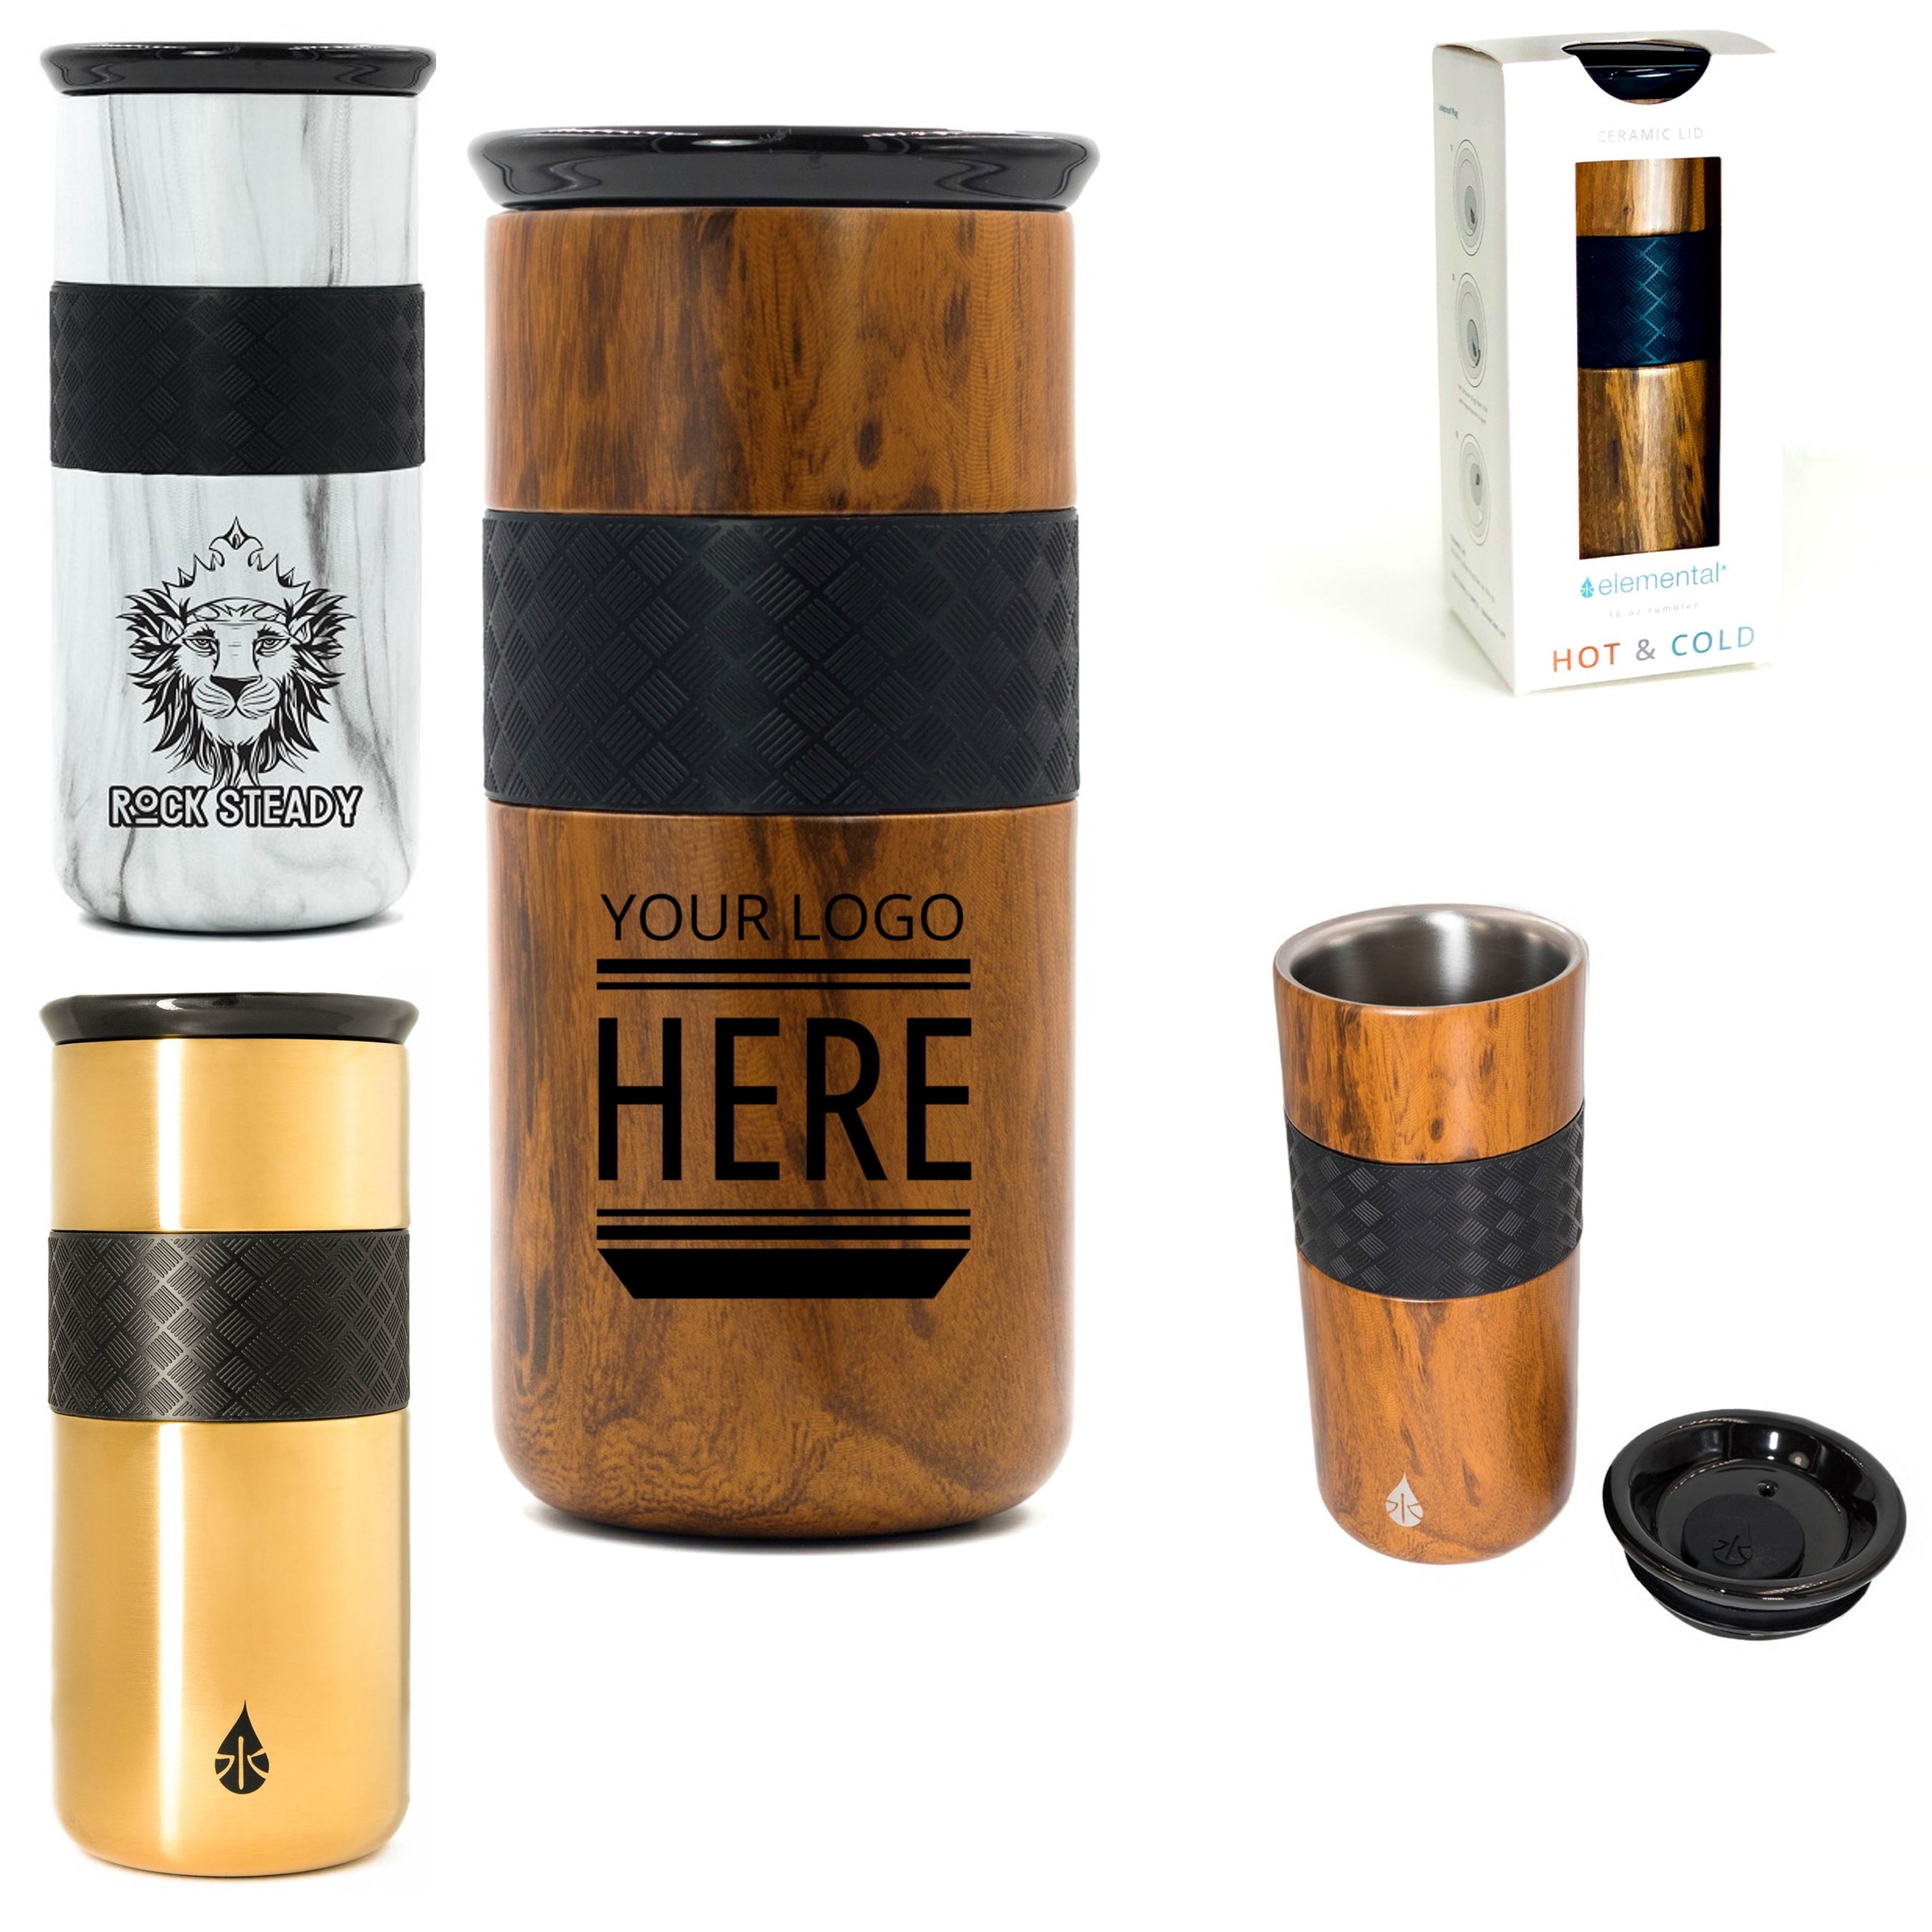 Elemental® Patterned Stainless Steel Stainless Tumbler 16 oz